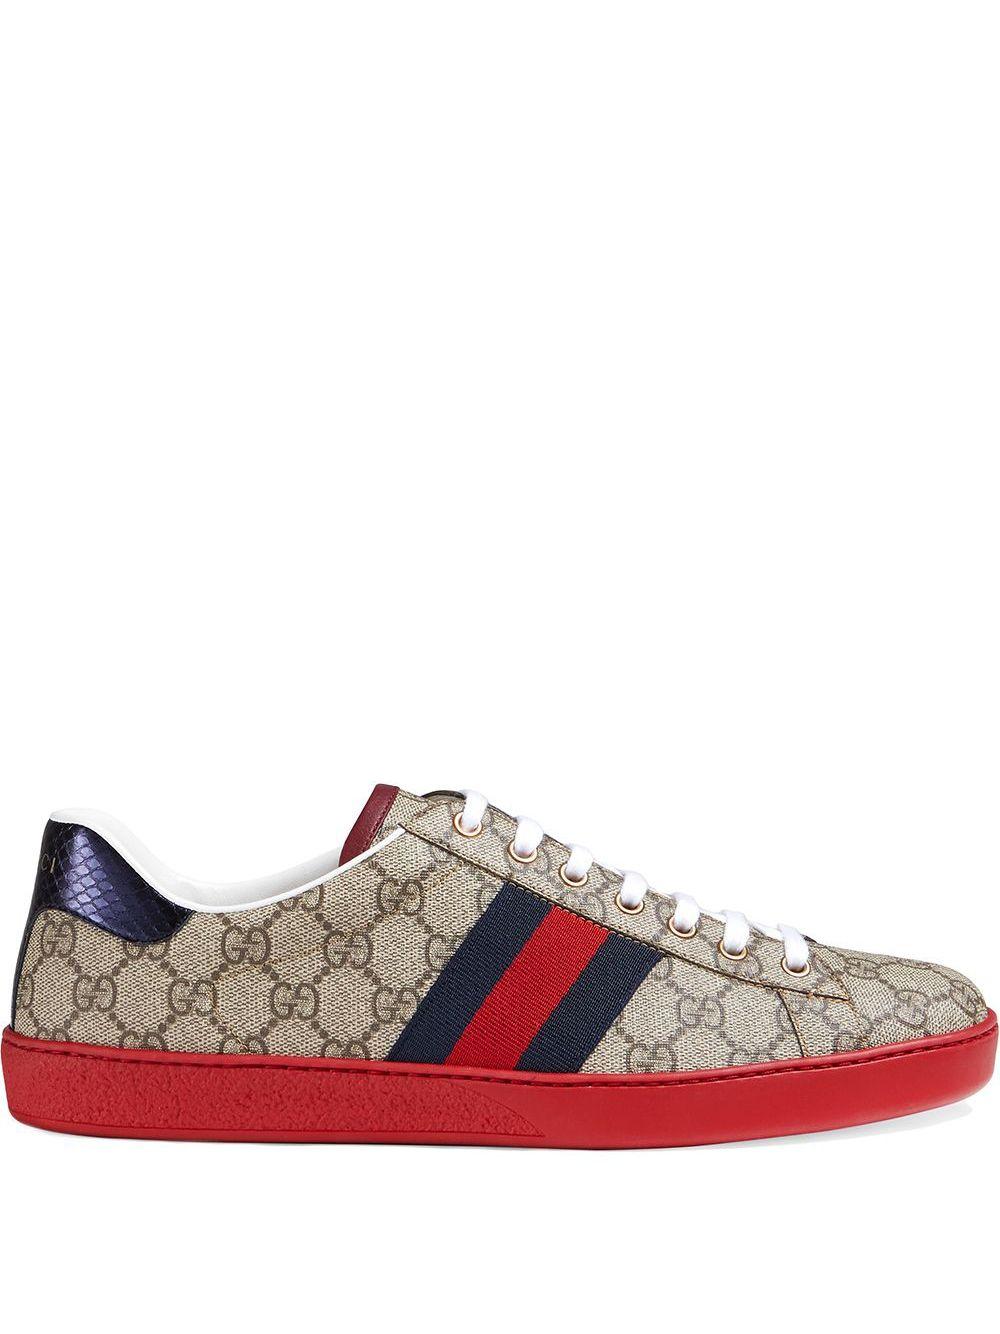 Gucci Canvas Ace Gg Print Trainers for Men - Save 34% - Lyst